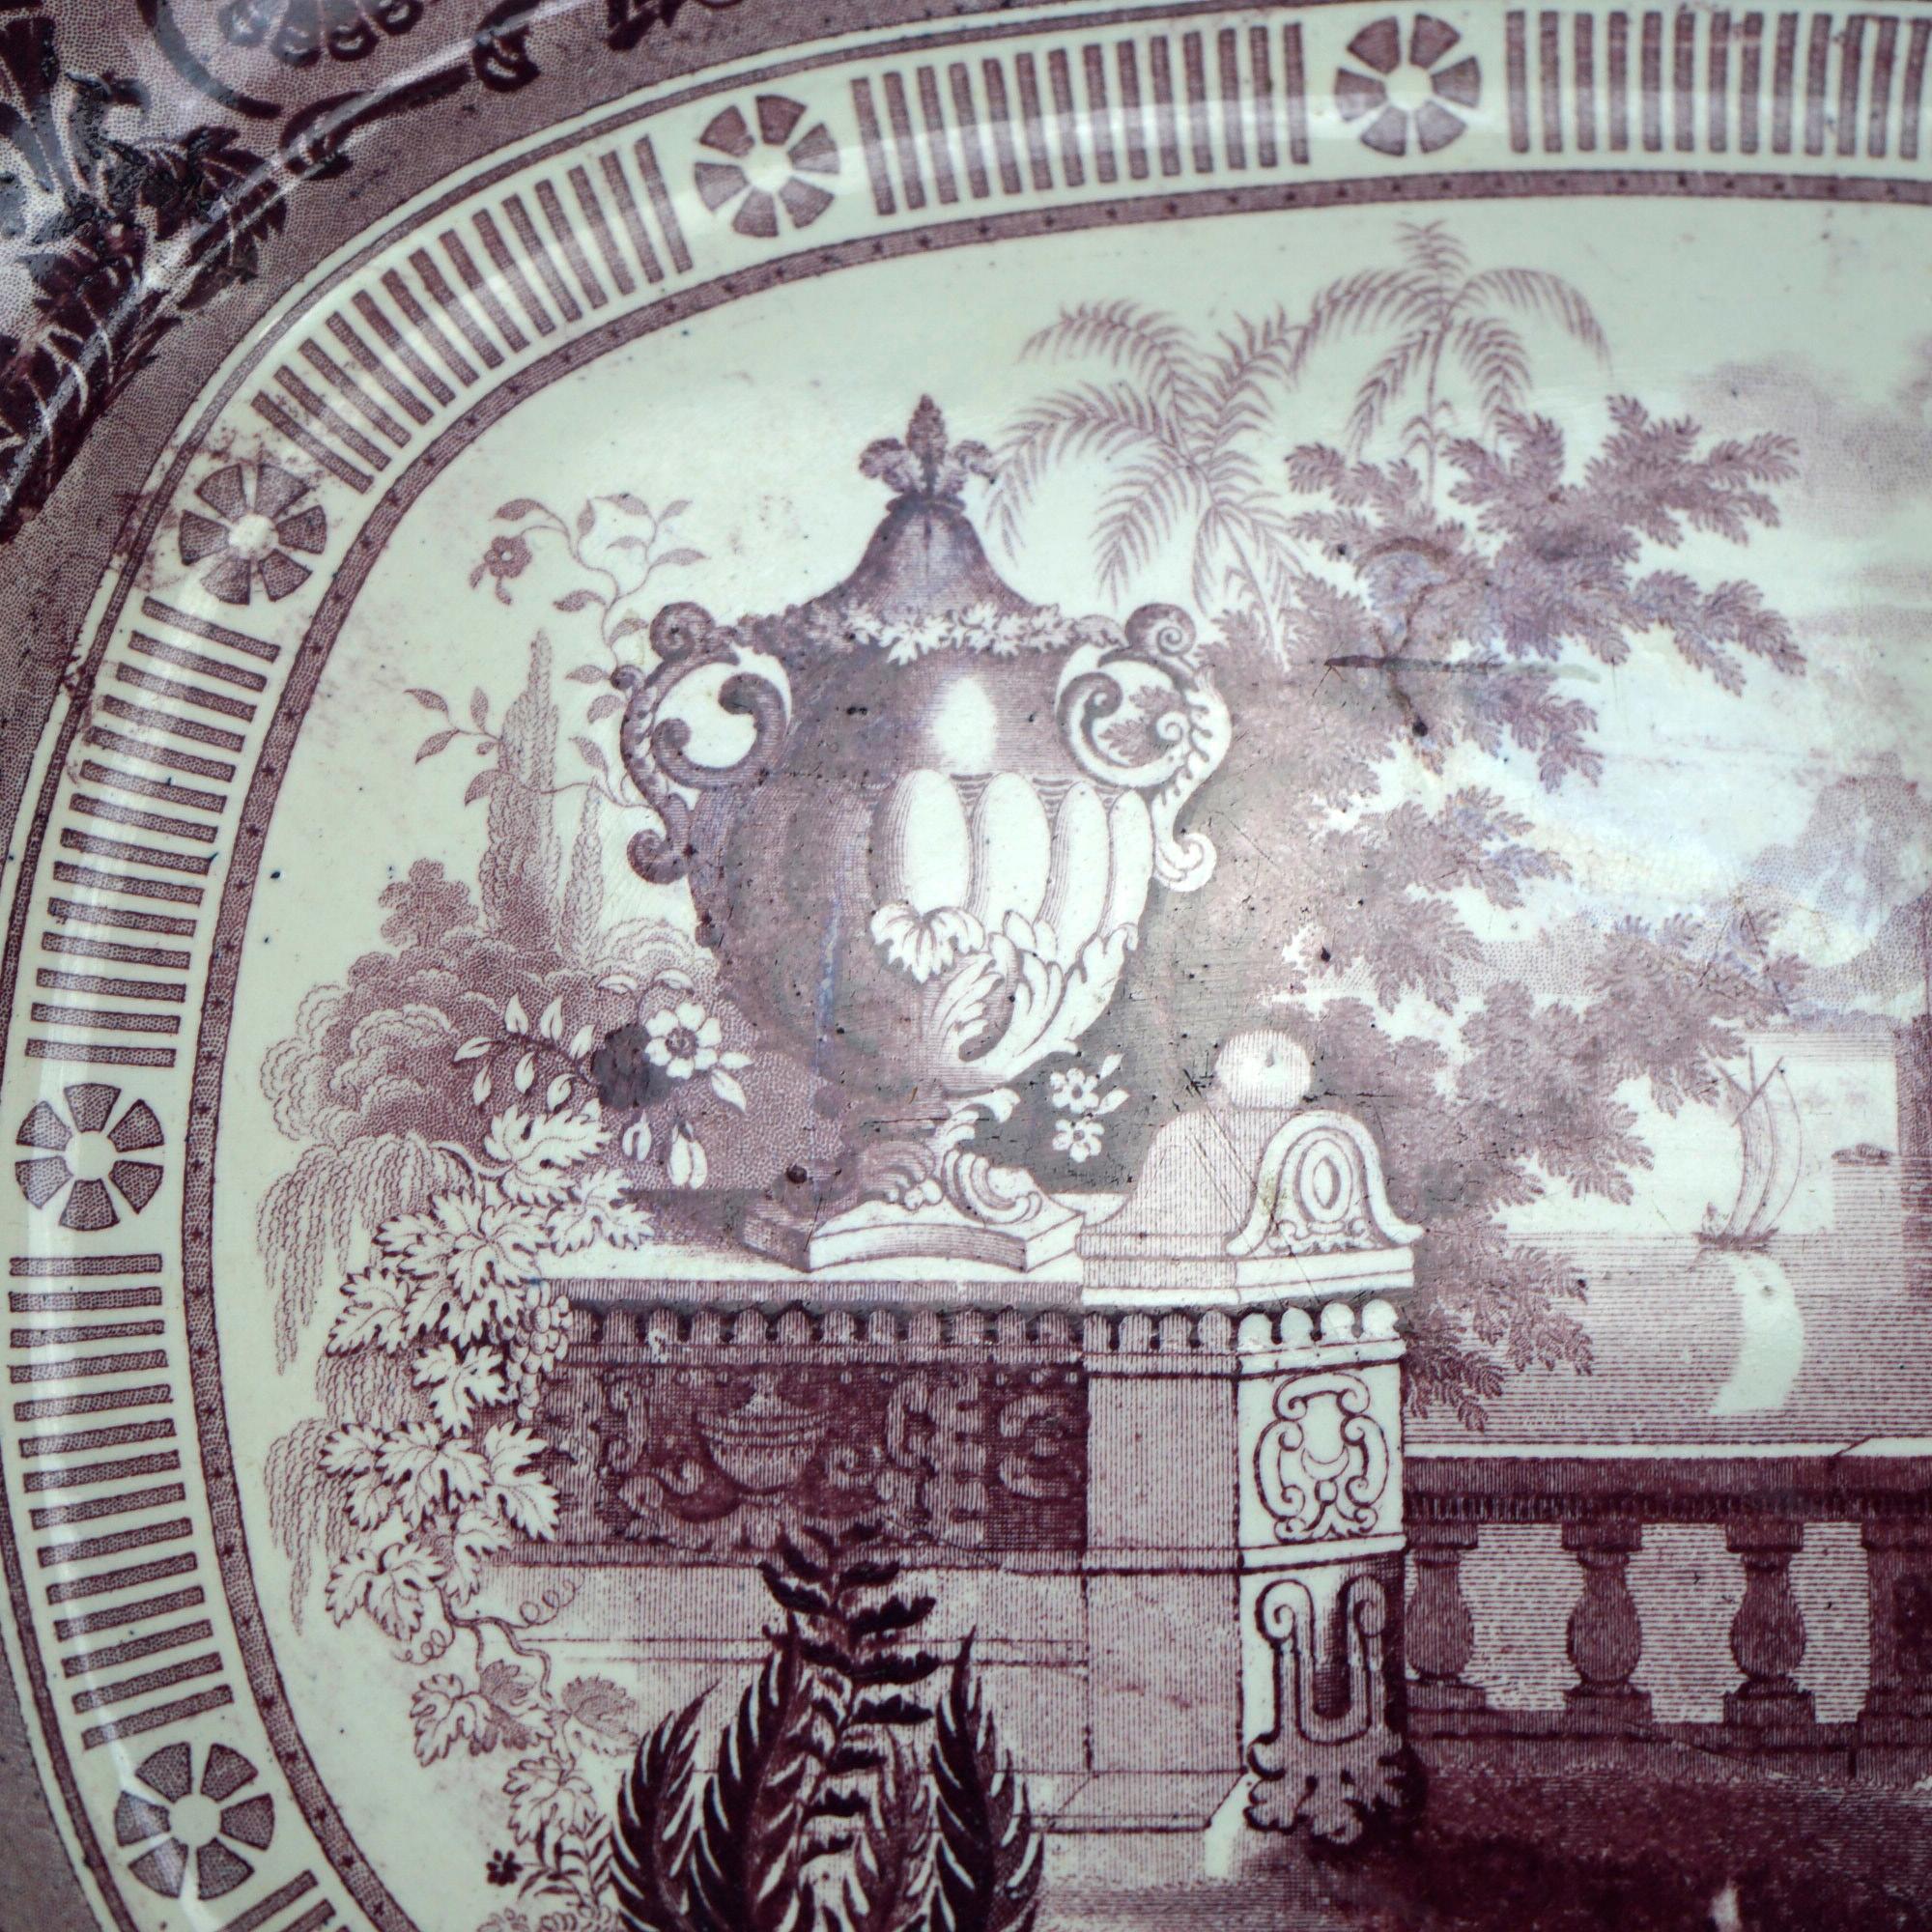 An antique Staffordshire mulberry transferware platter by E. W. & S. offers porcelain construction in Etruscan Vase pattern, maker mark en verso as photographed, 19th century

Measures - 1.5'' H x 15.25'' W x 13.25'' D.